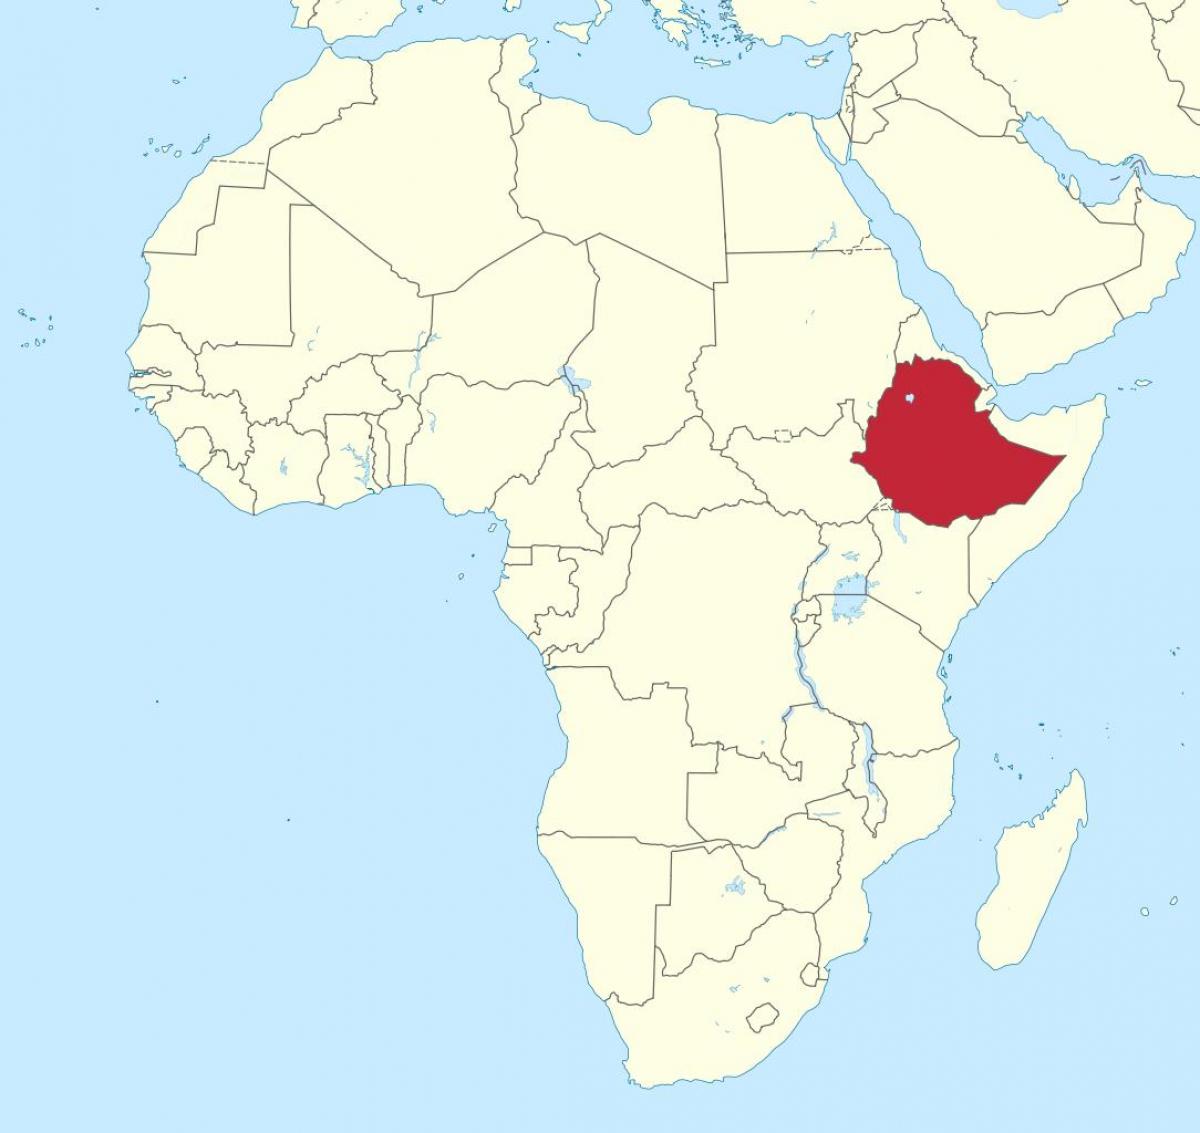 map of africa showing Ethiopia